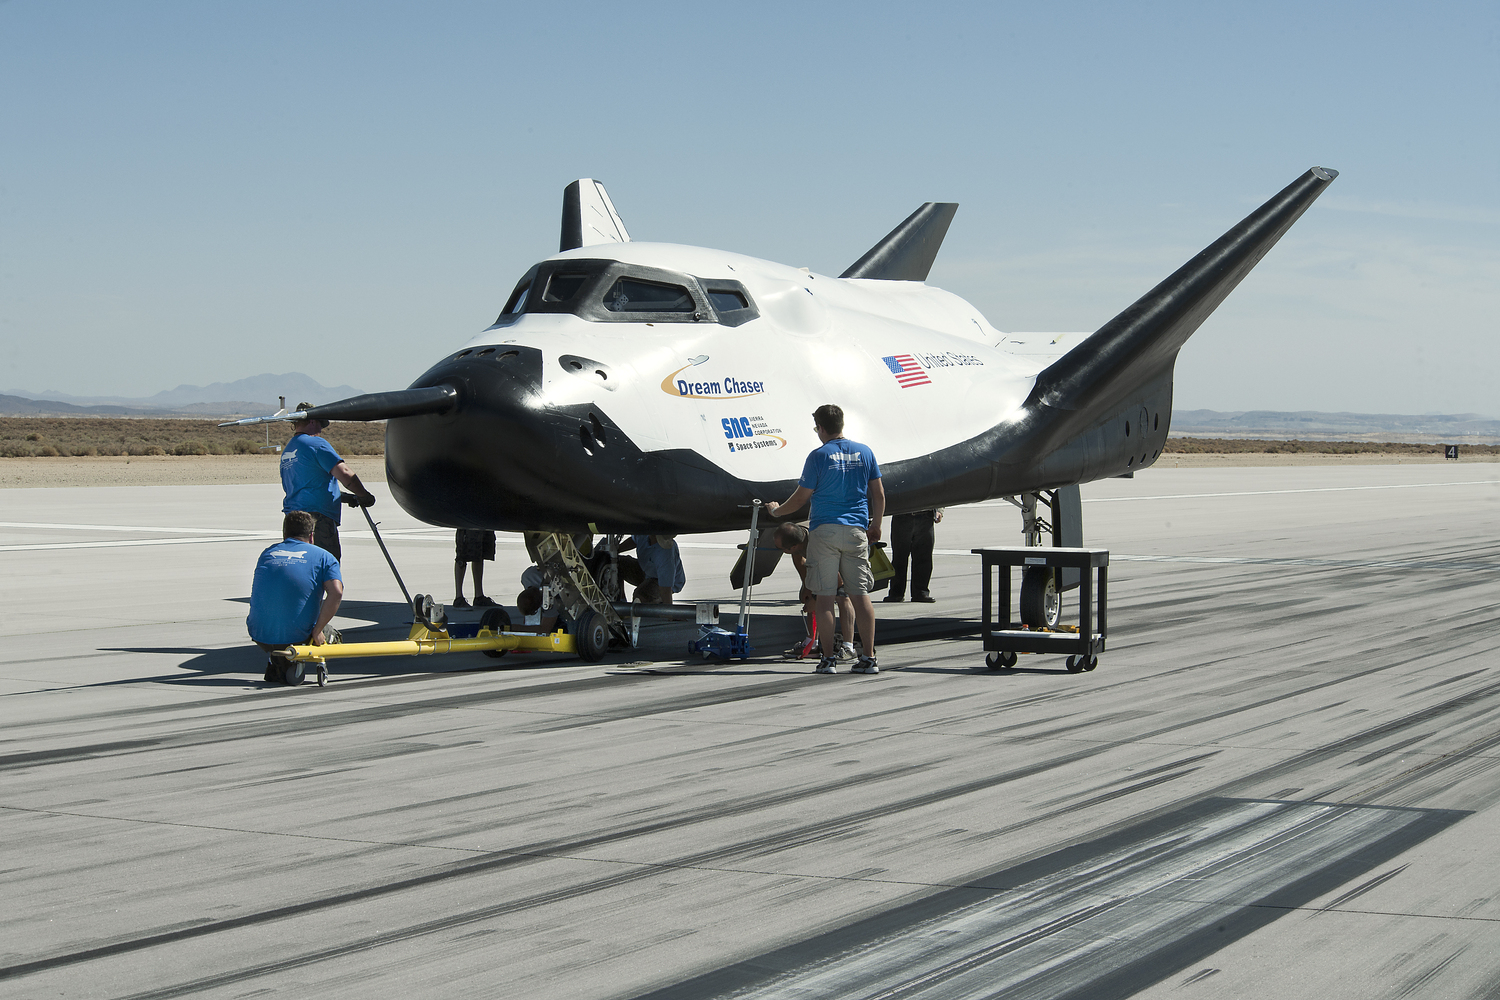 Sierra Nevada Corporation (SNC) recently announced the expansion of its Dream Chaser® program team and scope of work in Huntsville, Ala., with the signing of a Space Act Agreement (SAA) Annex with NASA’s Marshall Space Flight Center (MSFC) and a Teaming Agreement with Teledyne Brown Engineering (TBE). Photo Credit: NASA/Ken Ulbrich